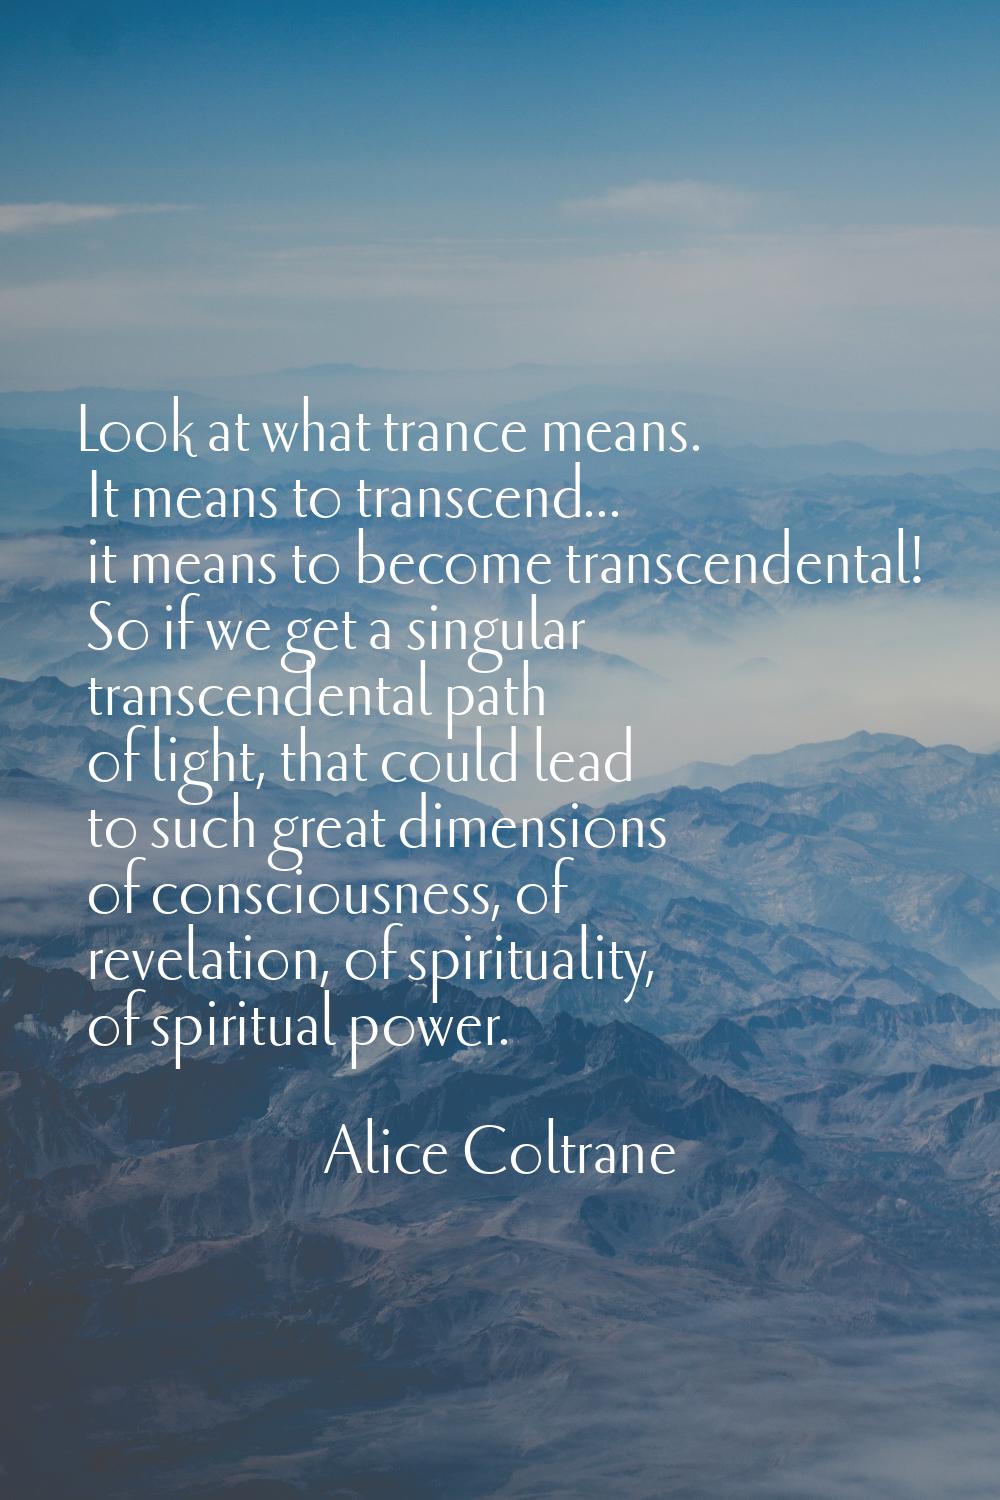 Look at what trance means. It means to transcend... it means to become transcendental! So if we get